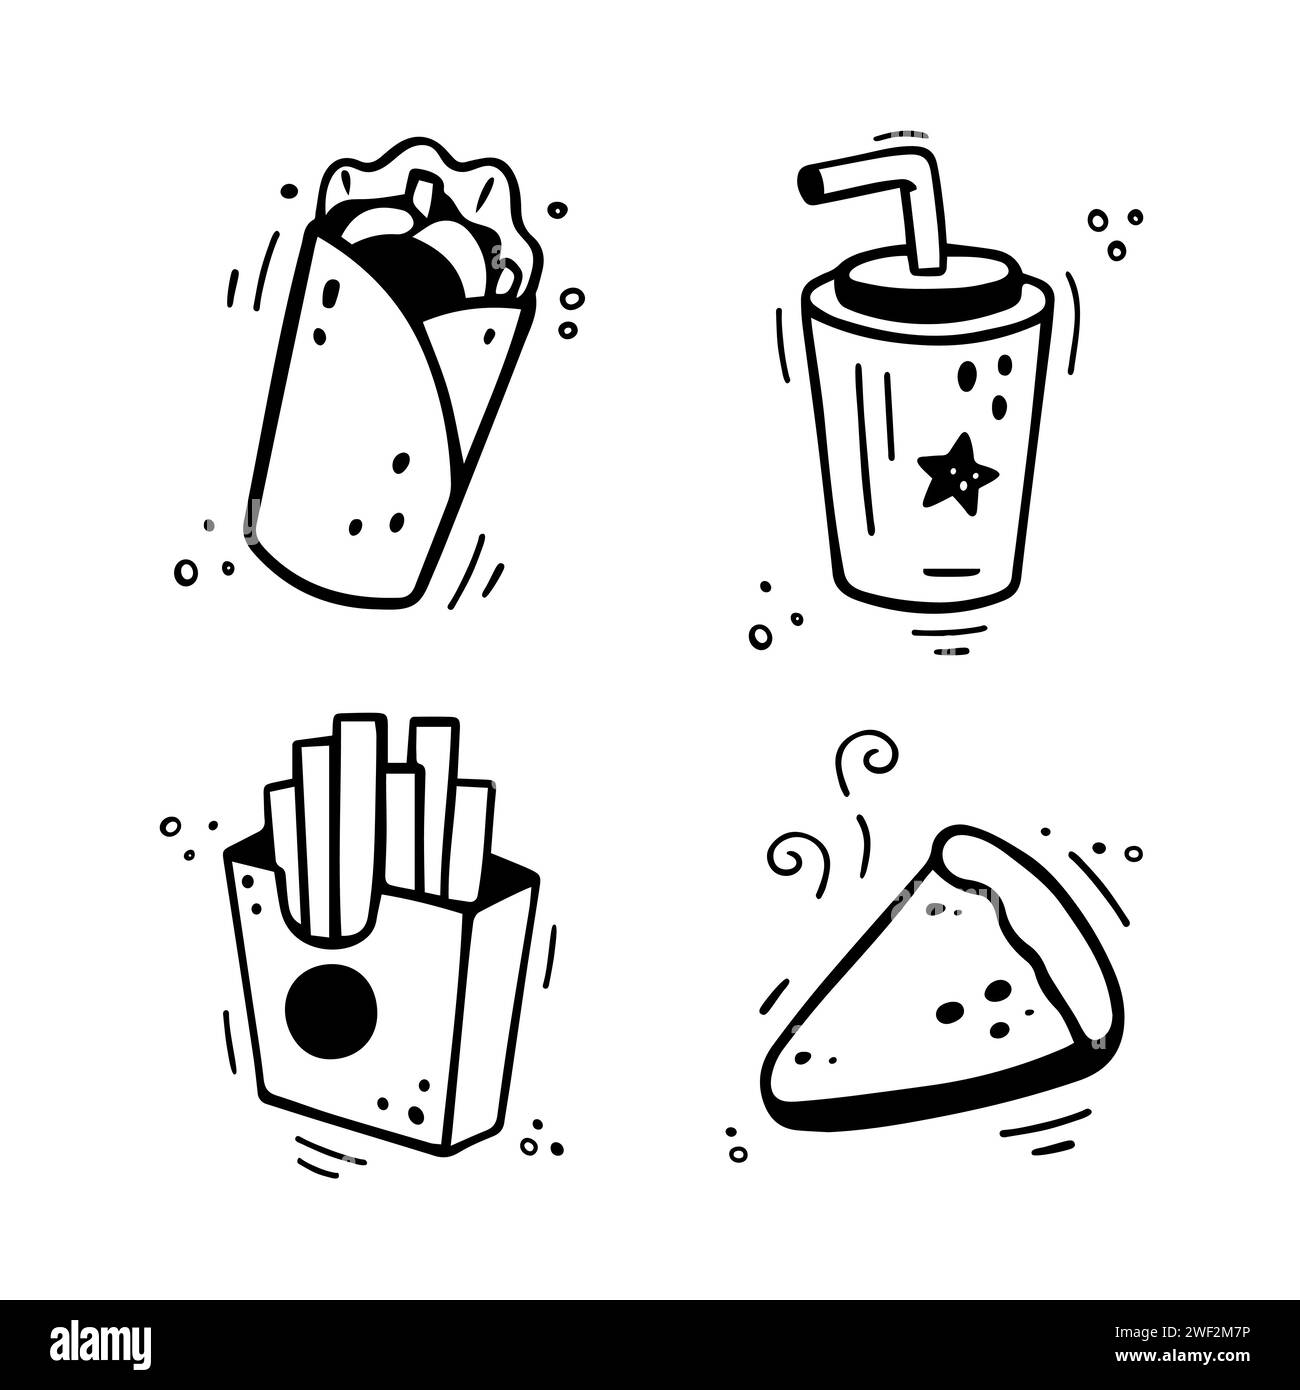 Fast food icons set - shawarma, burrito, French fries, paper cup with drink, pie, cake, tart, cheesecake Hand drawn fast food combo. Comic doodle sketch style. Vector illustration Stock Vector